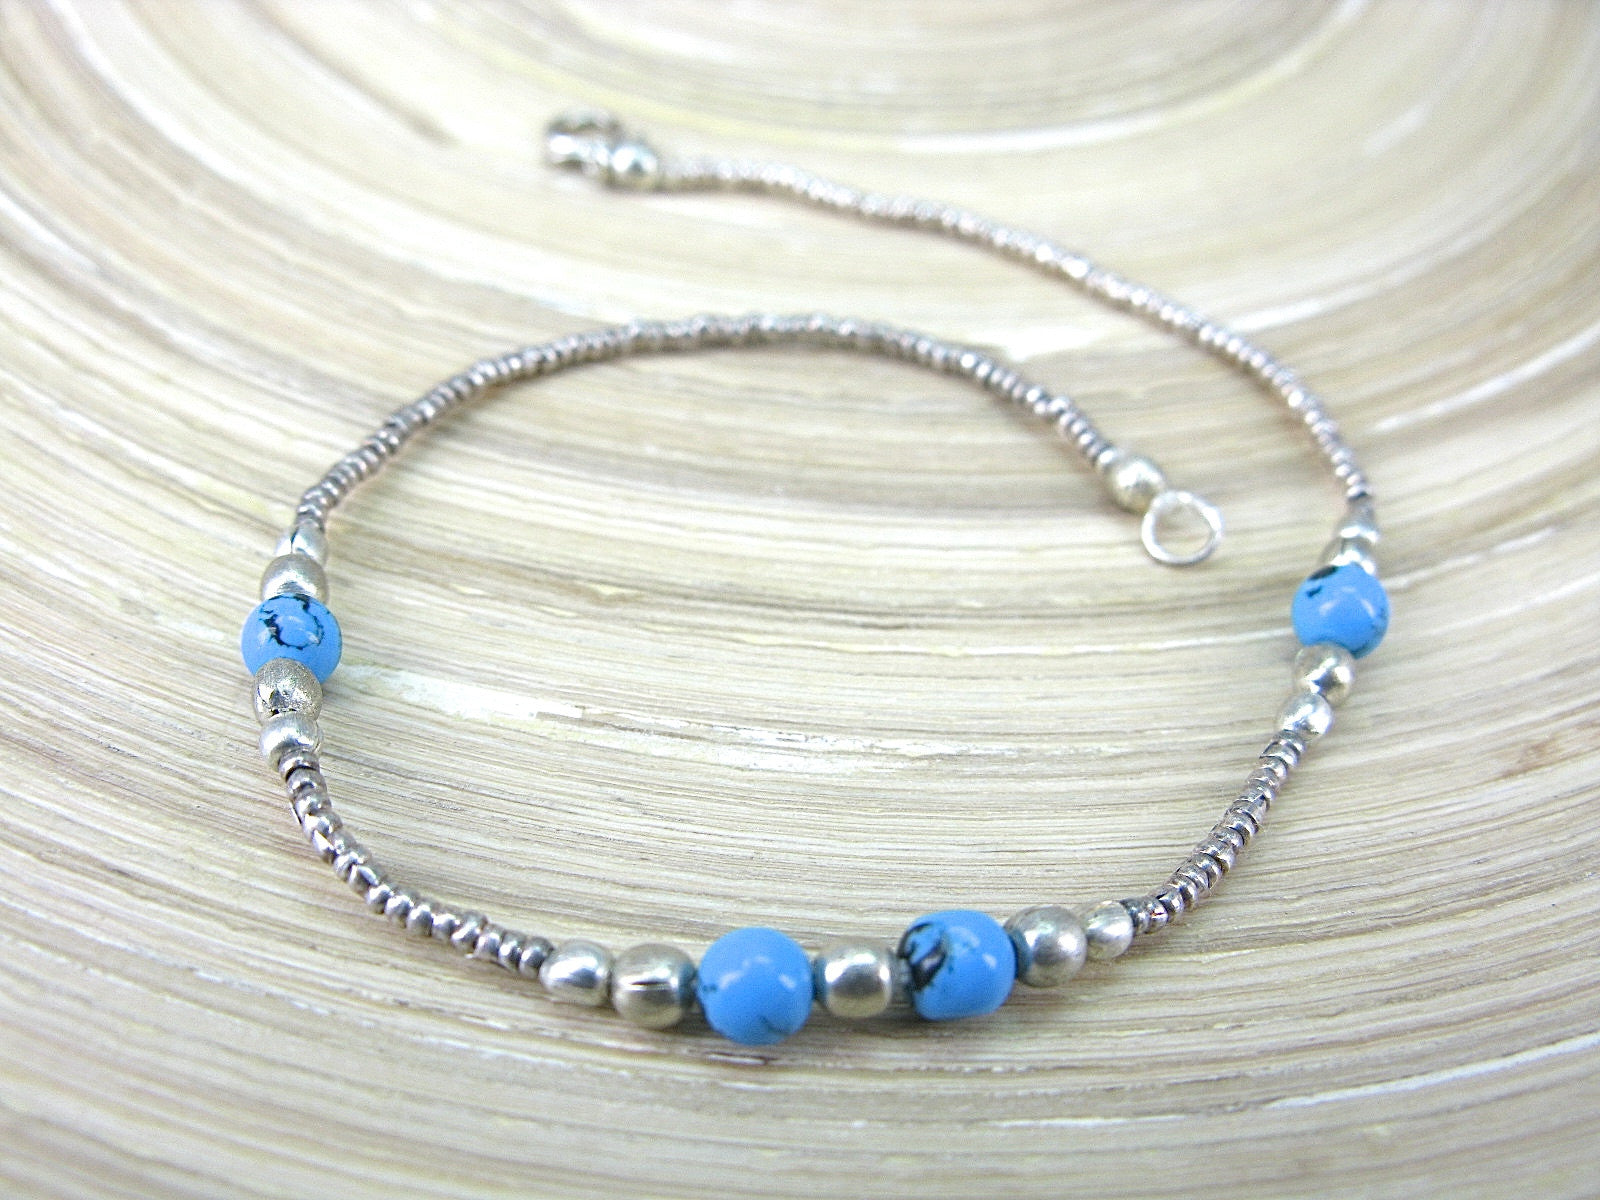 Turquoise Bead Tribal Oxidized 925 Sterling Silver Bracelet